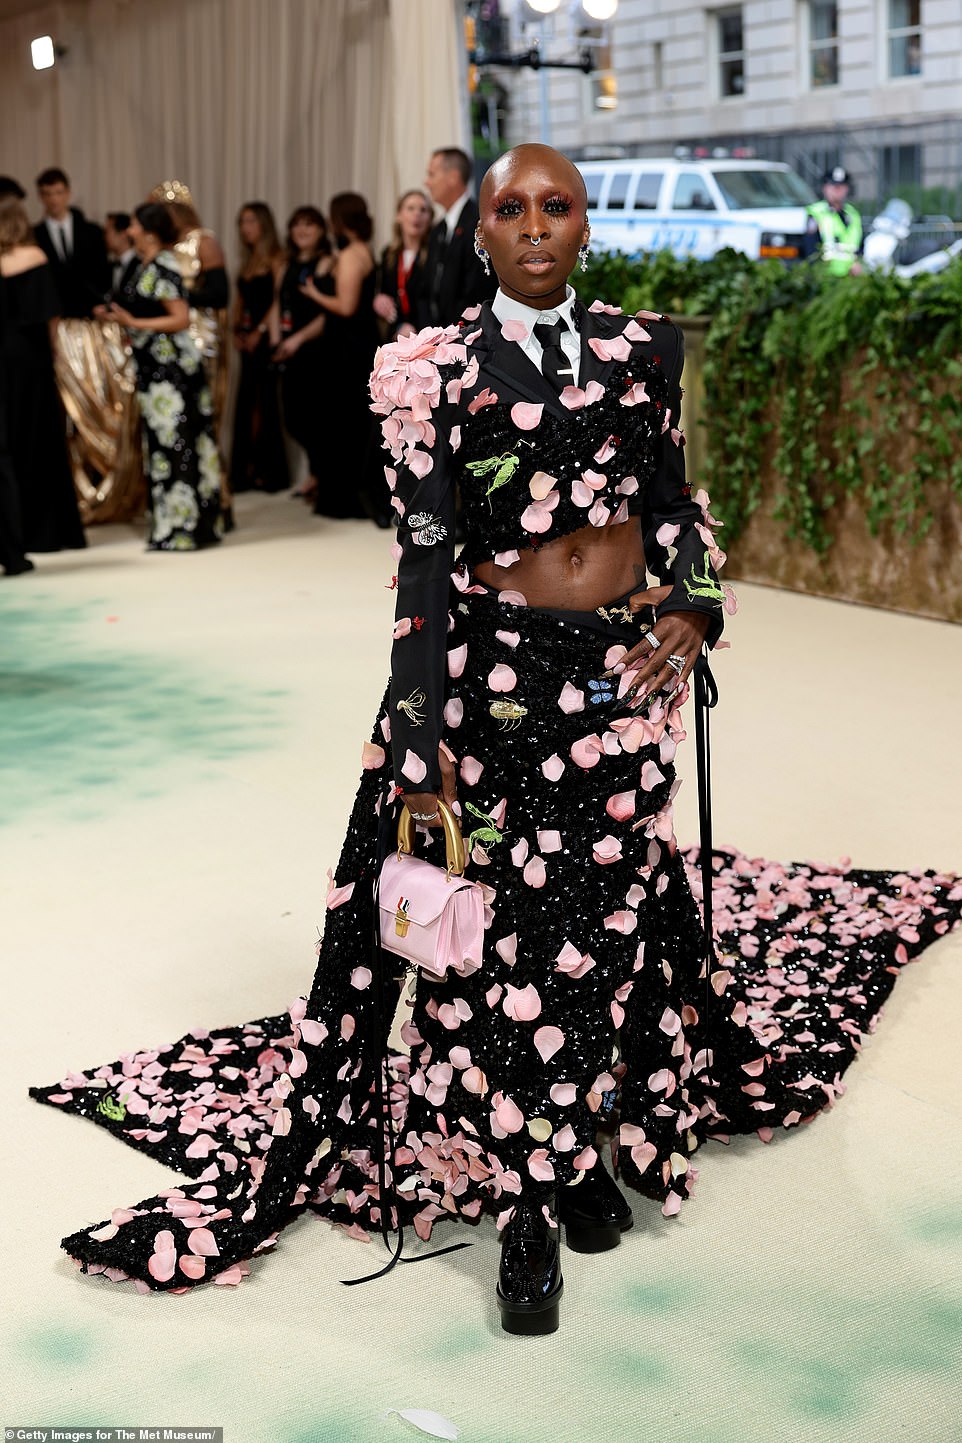 Cynthia Erivo dazzled in a statement gown - consisting of a black jacket and matching maxi skirt with pink rose petals attached to it, along with butterfly and different type of faux insects also attached; she is wearing Thom Browne